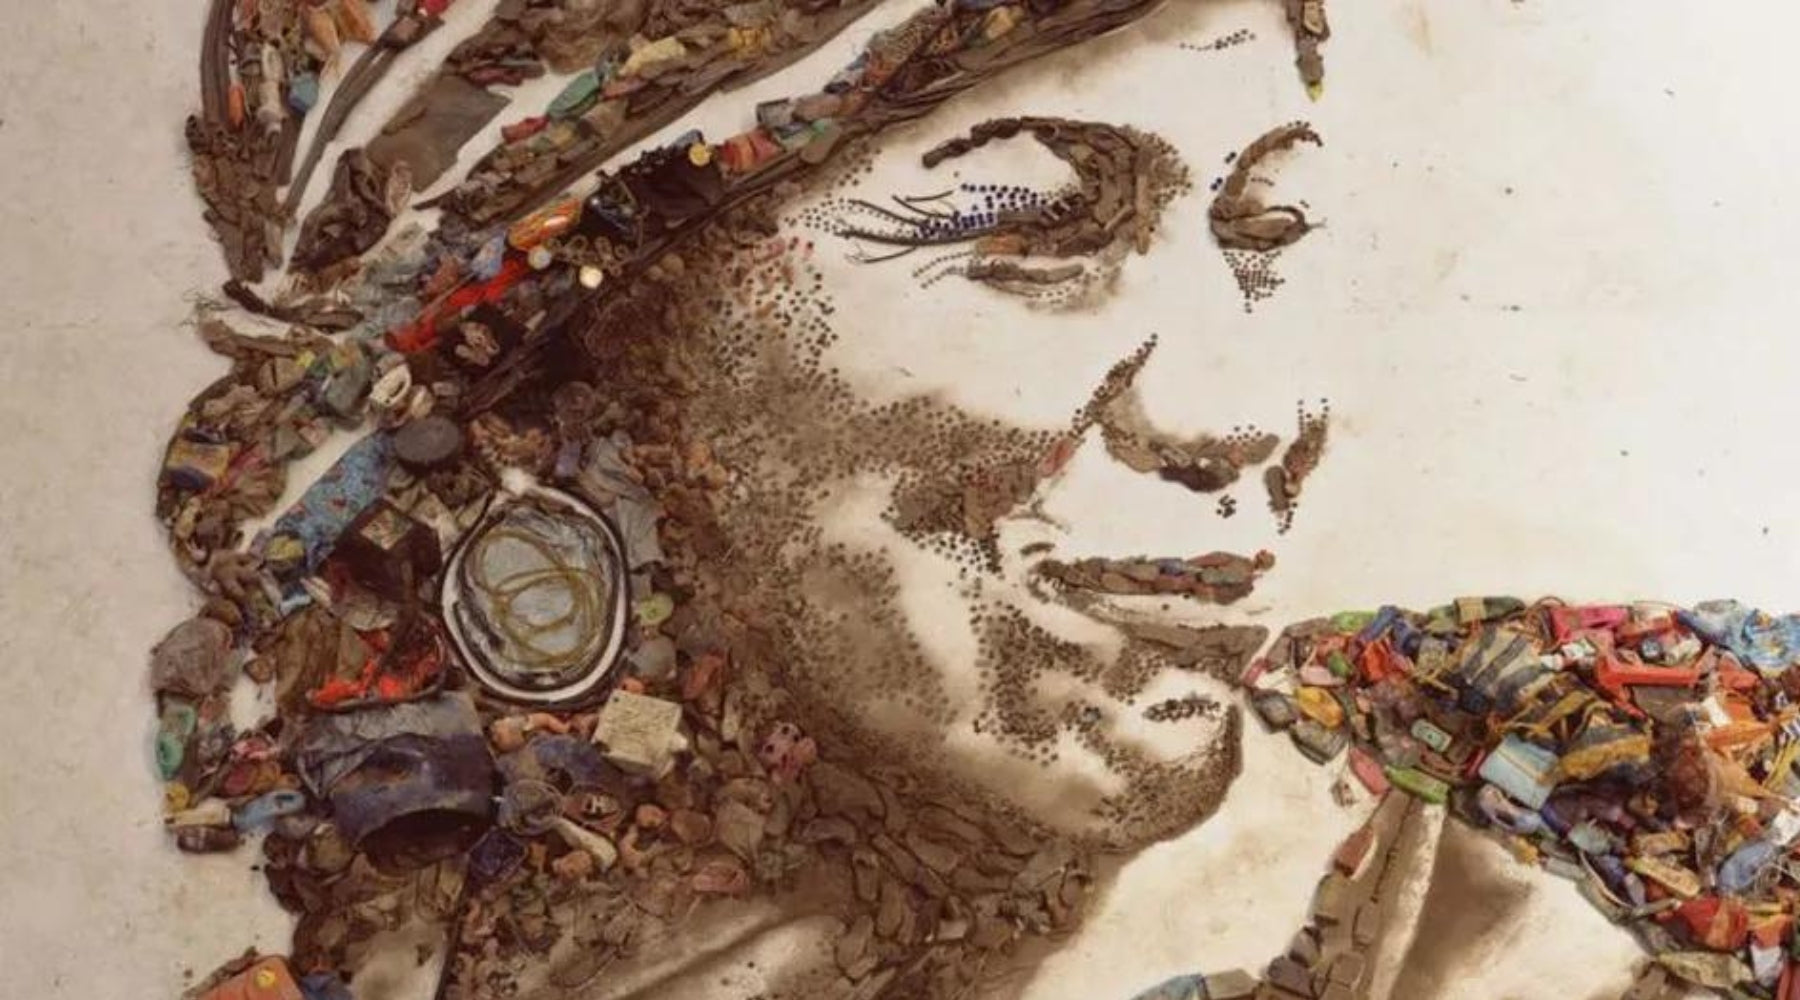 5 DOCUMENTARIES TO LEARN MORE ABOUT SUSTAINABILITY Waste Land